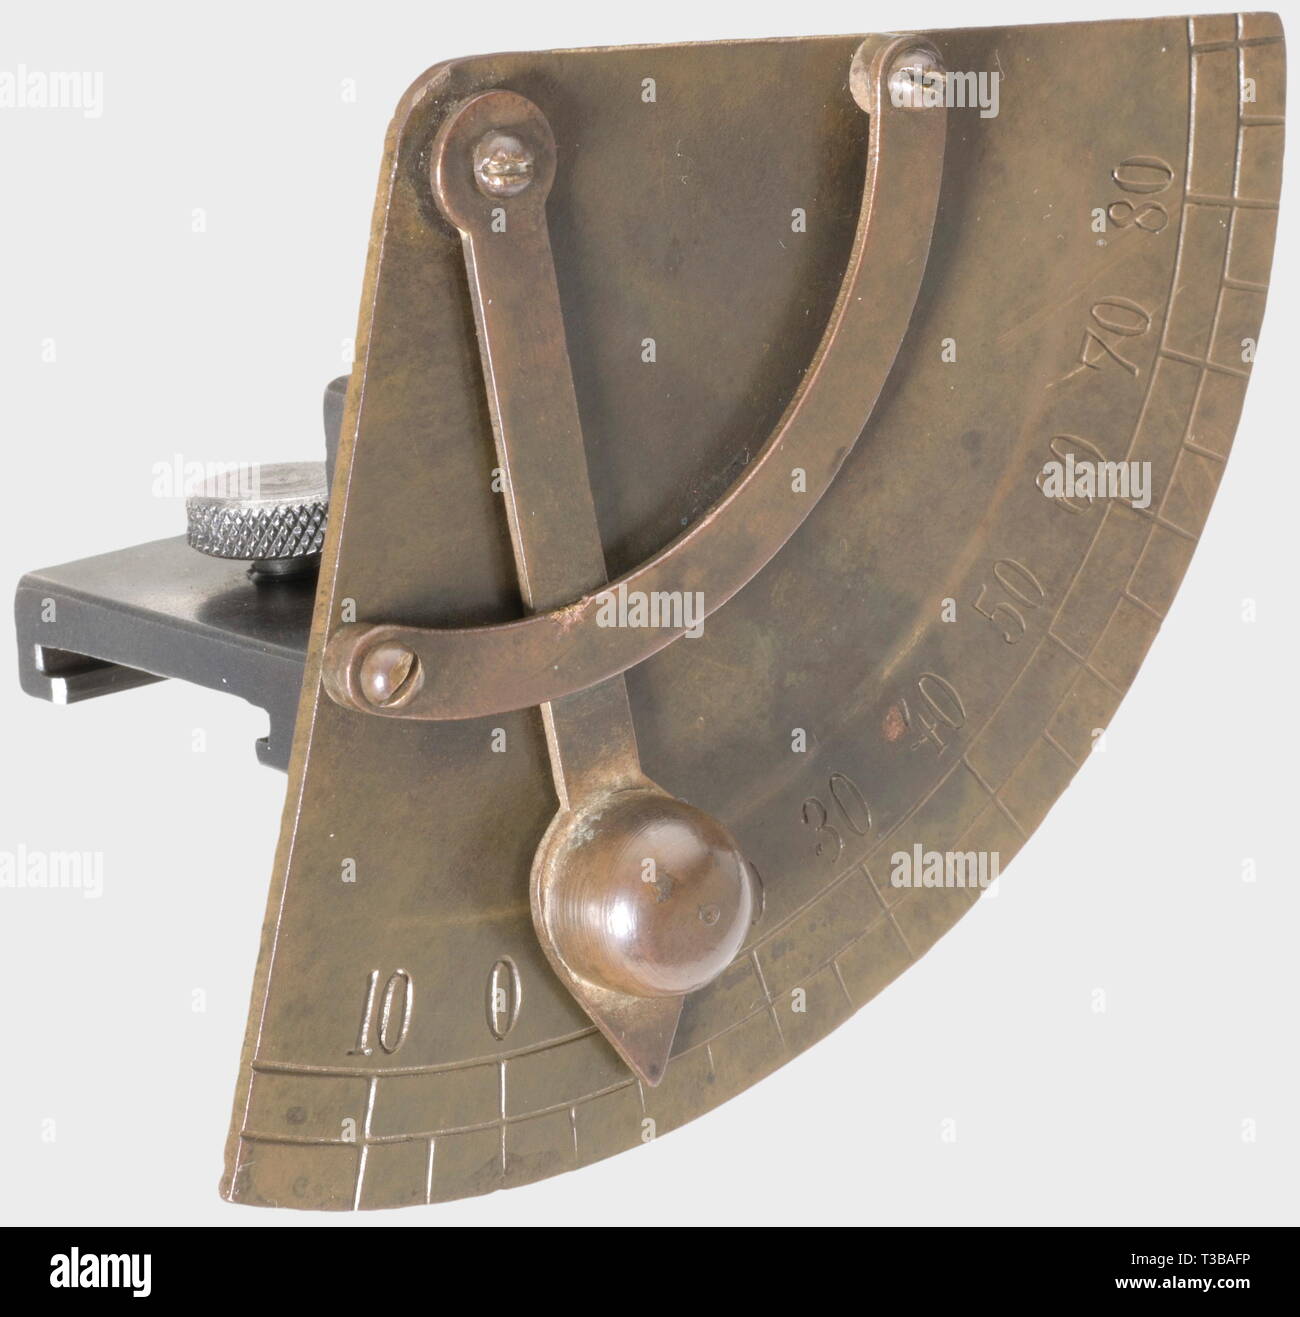 SERVICE WEAPONS, GERMAN EMPIRE, elevation gauge 1913 (grenade visor) for rifle 98, Additional-Rights-Clearance-Info-Not-Available Stock Photo